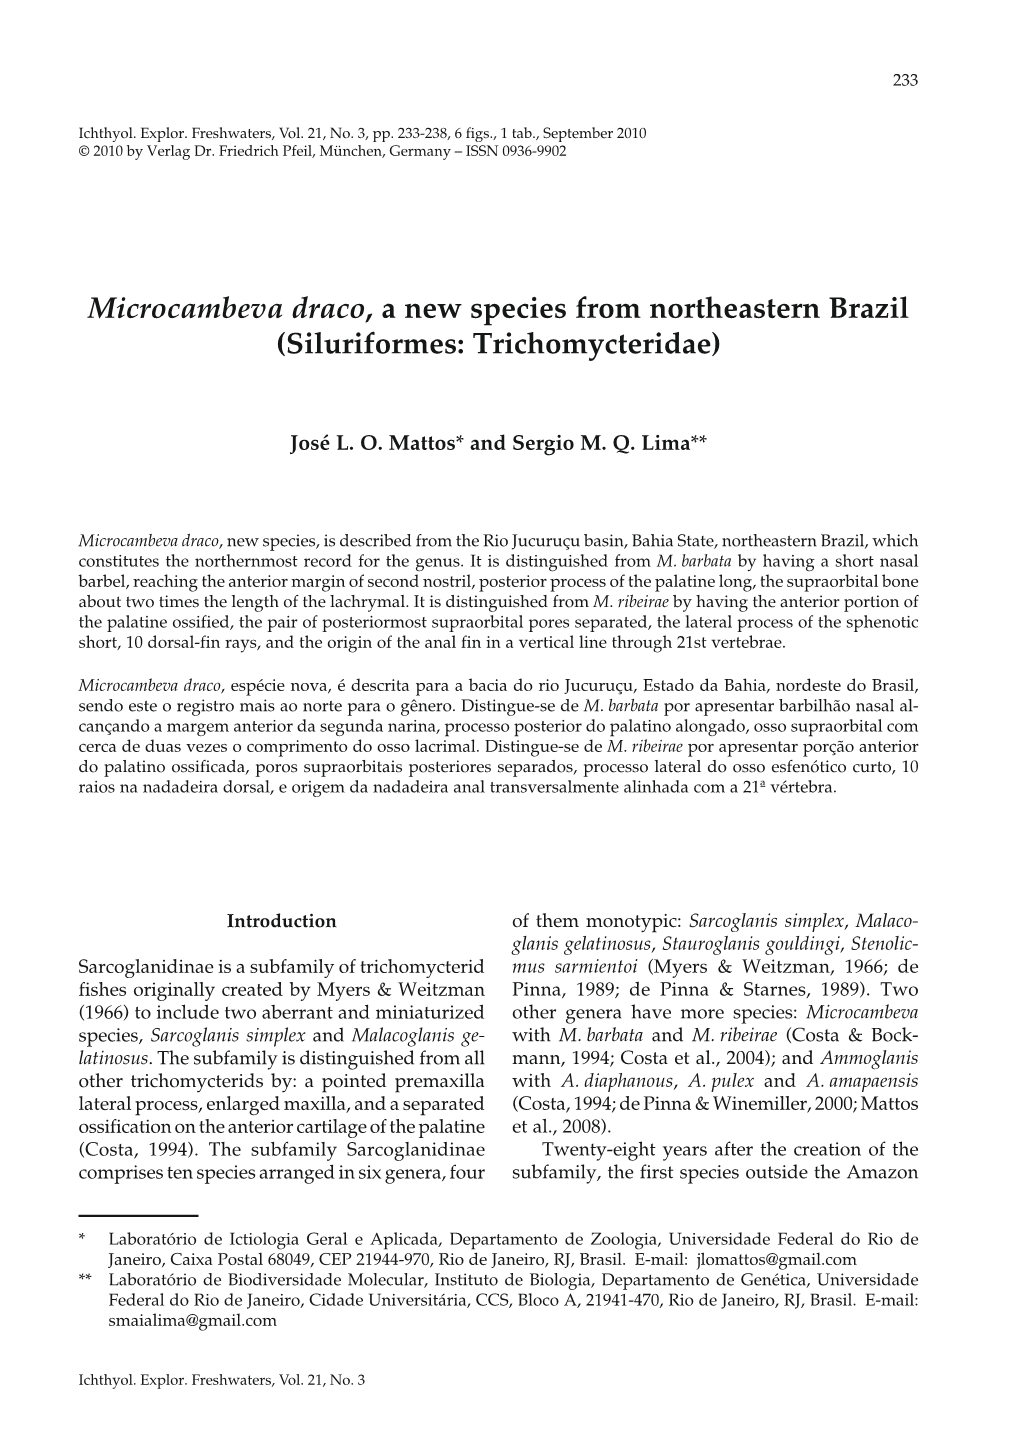 Microcambeva Draco , a New Species from Northeastern Brazil (Siluriformes: Trichomycteridae)